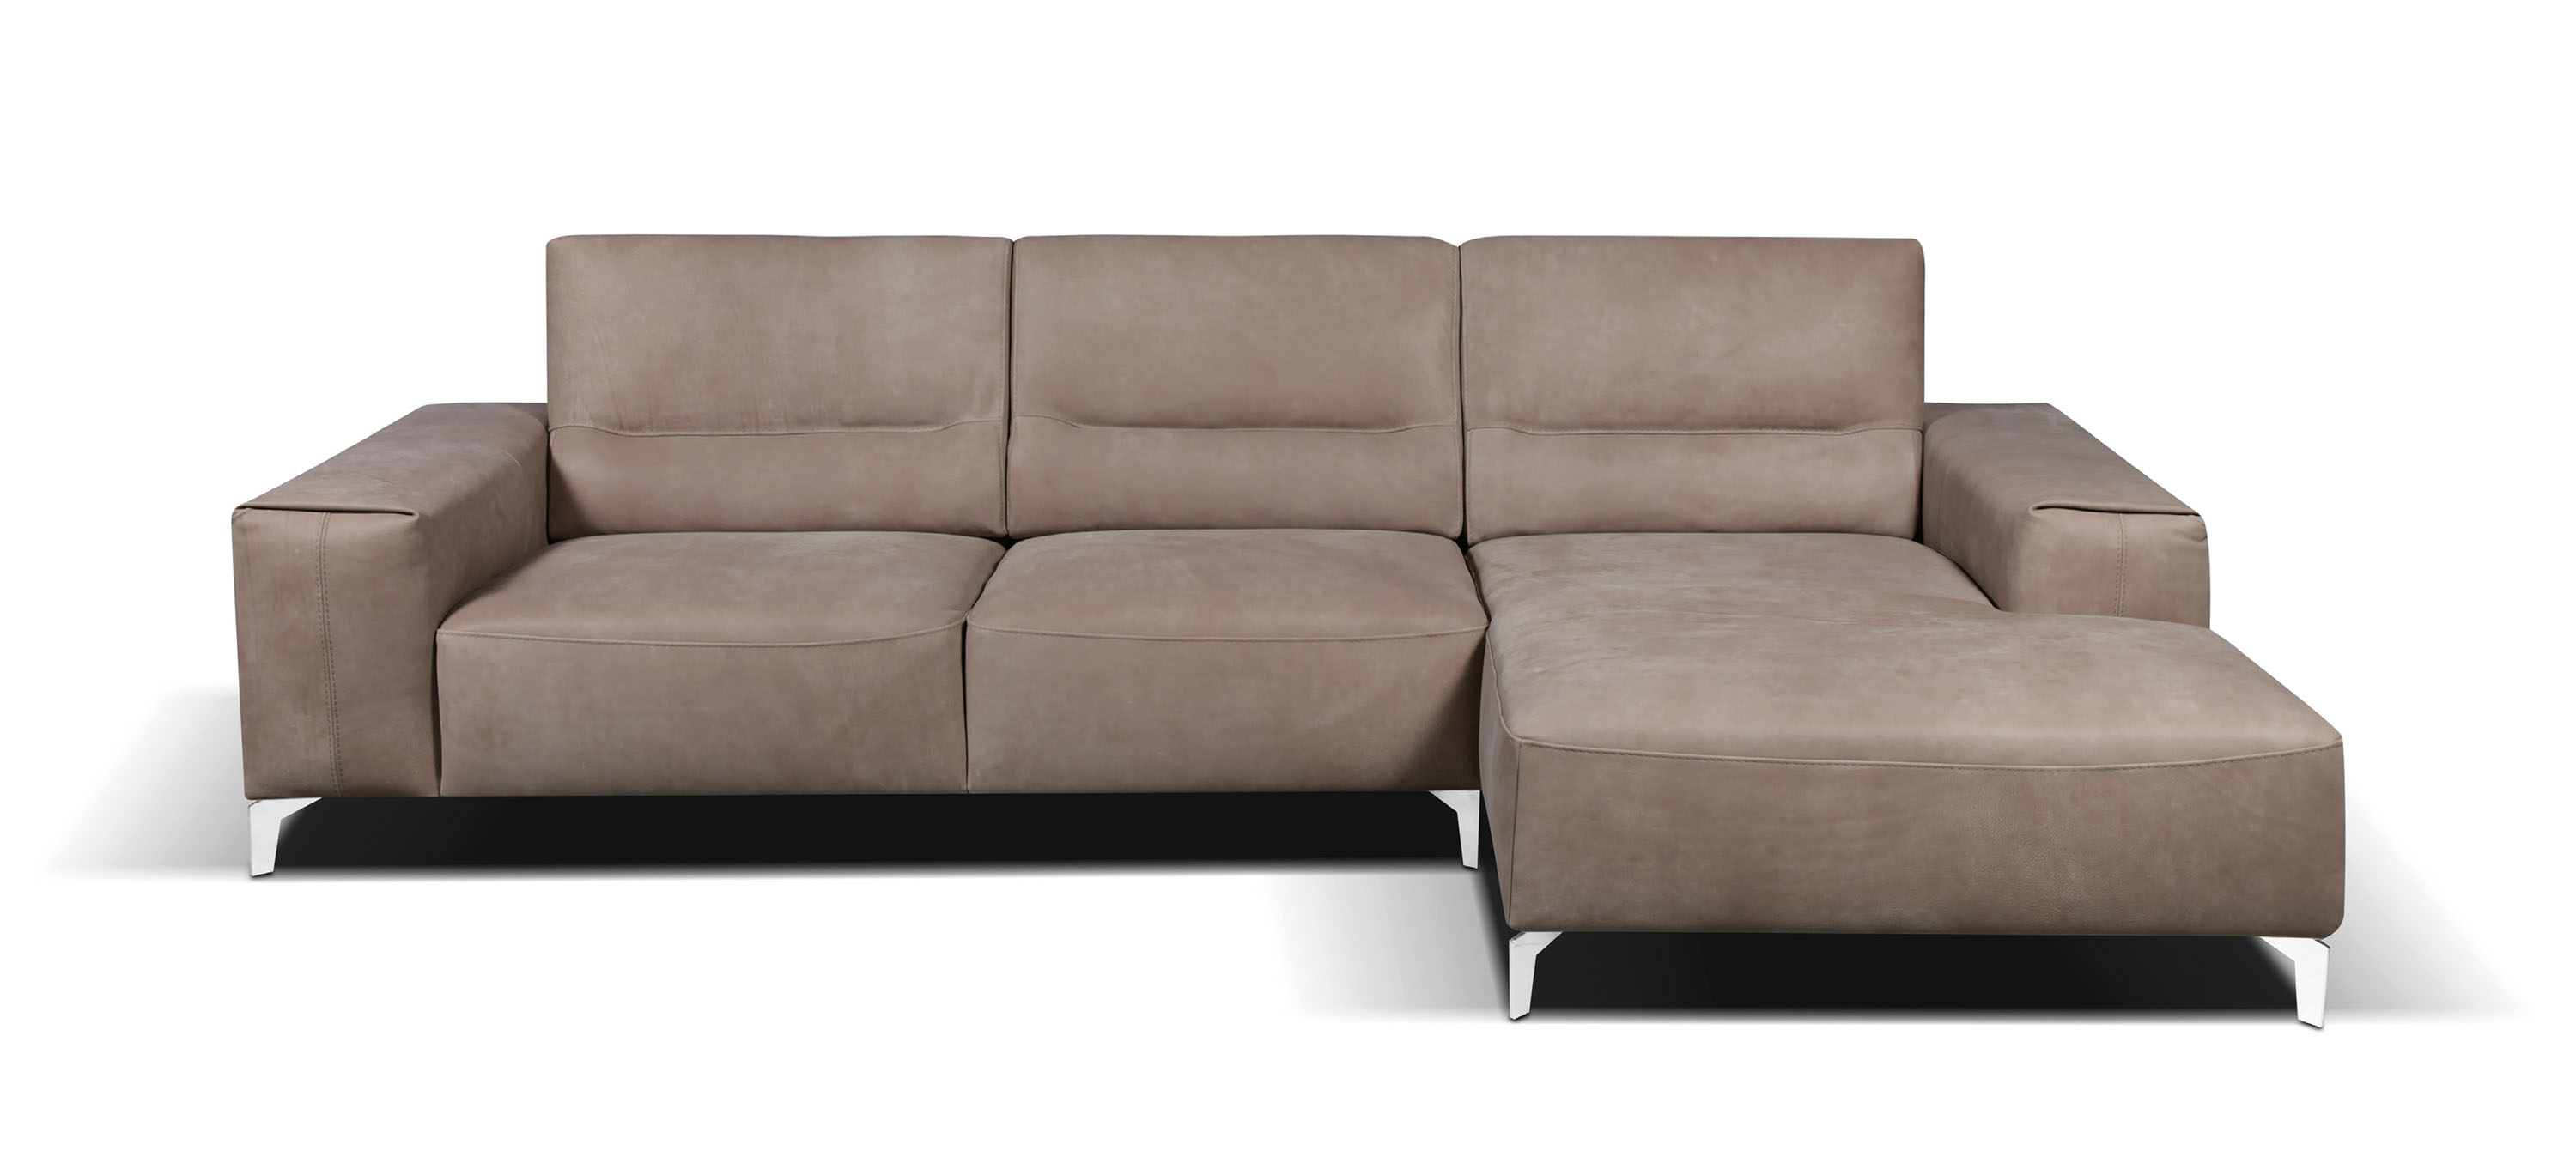 Small Studio Apartment Size Sectional with Optional Leather Chair